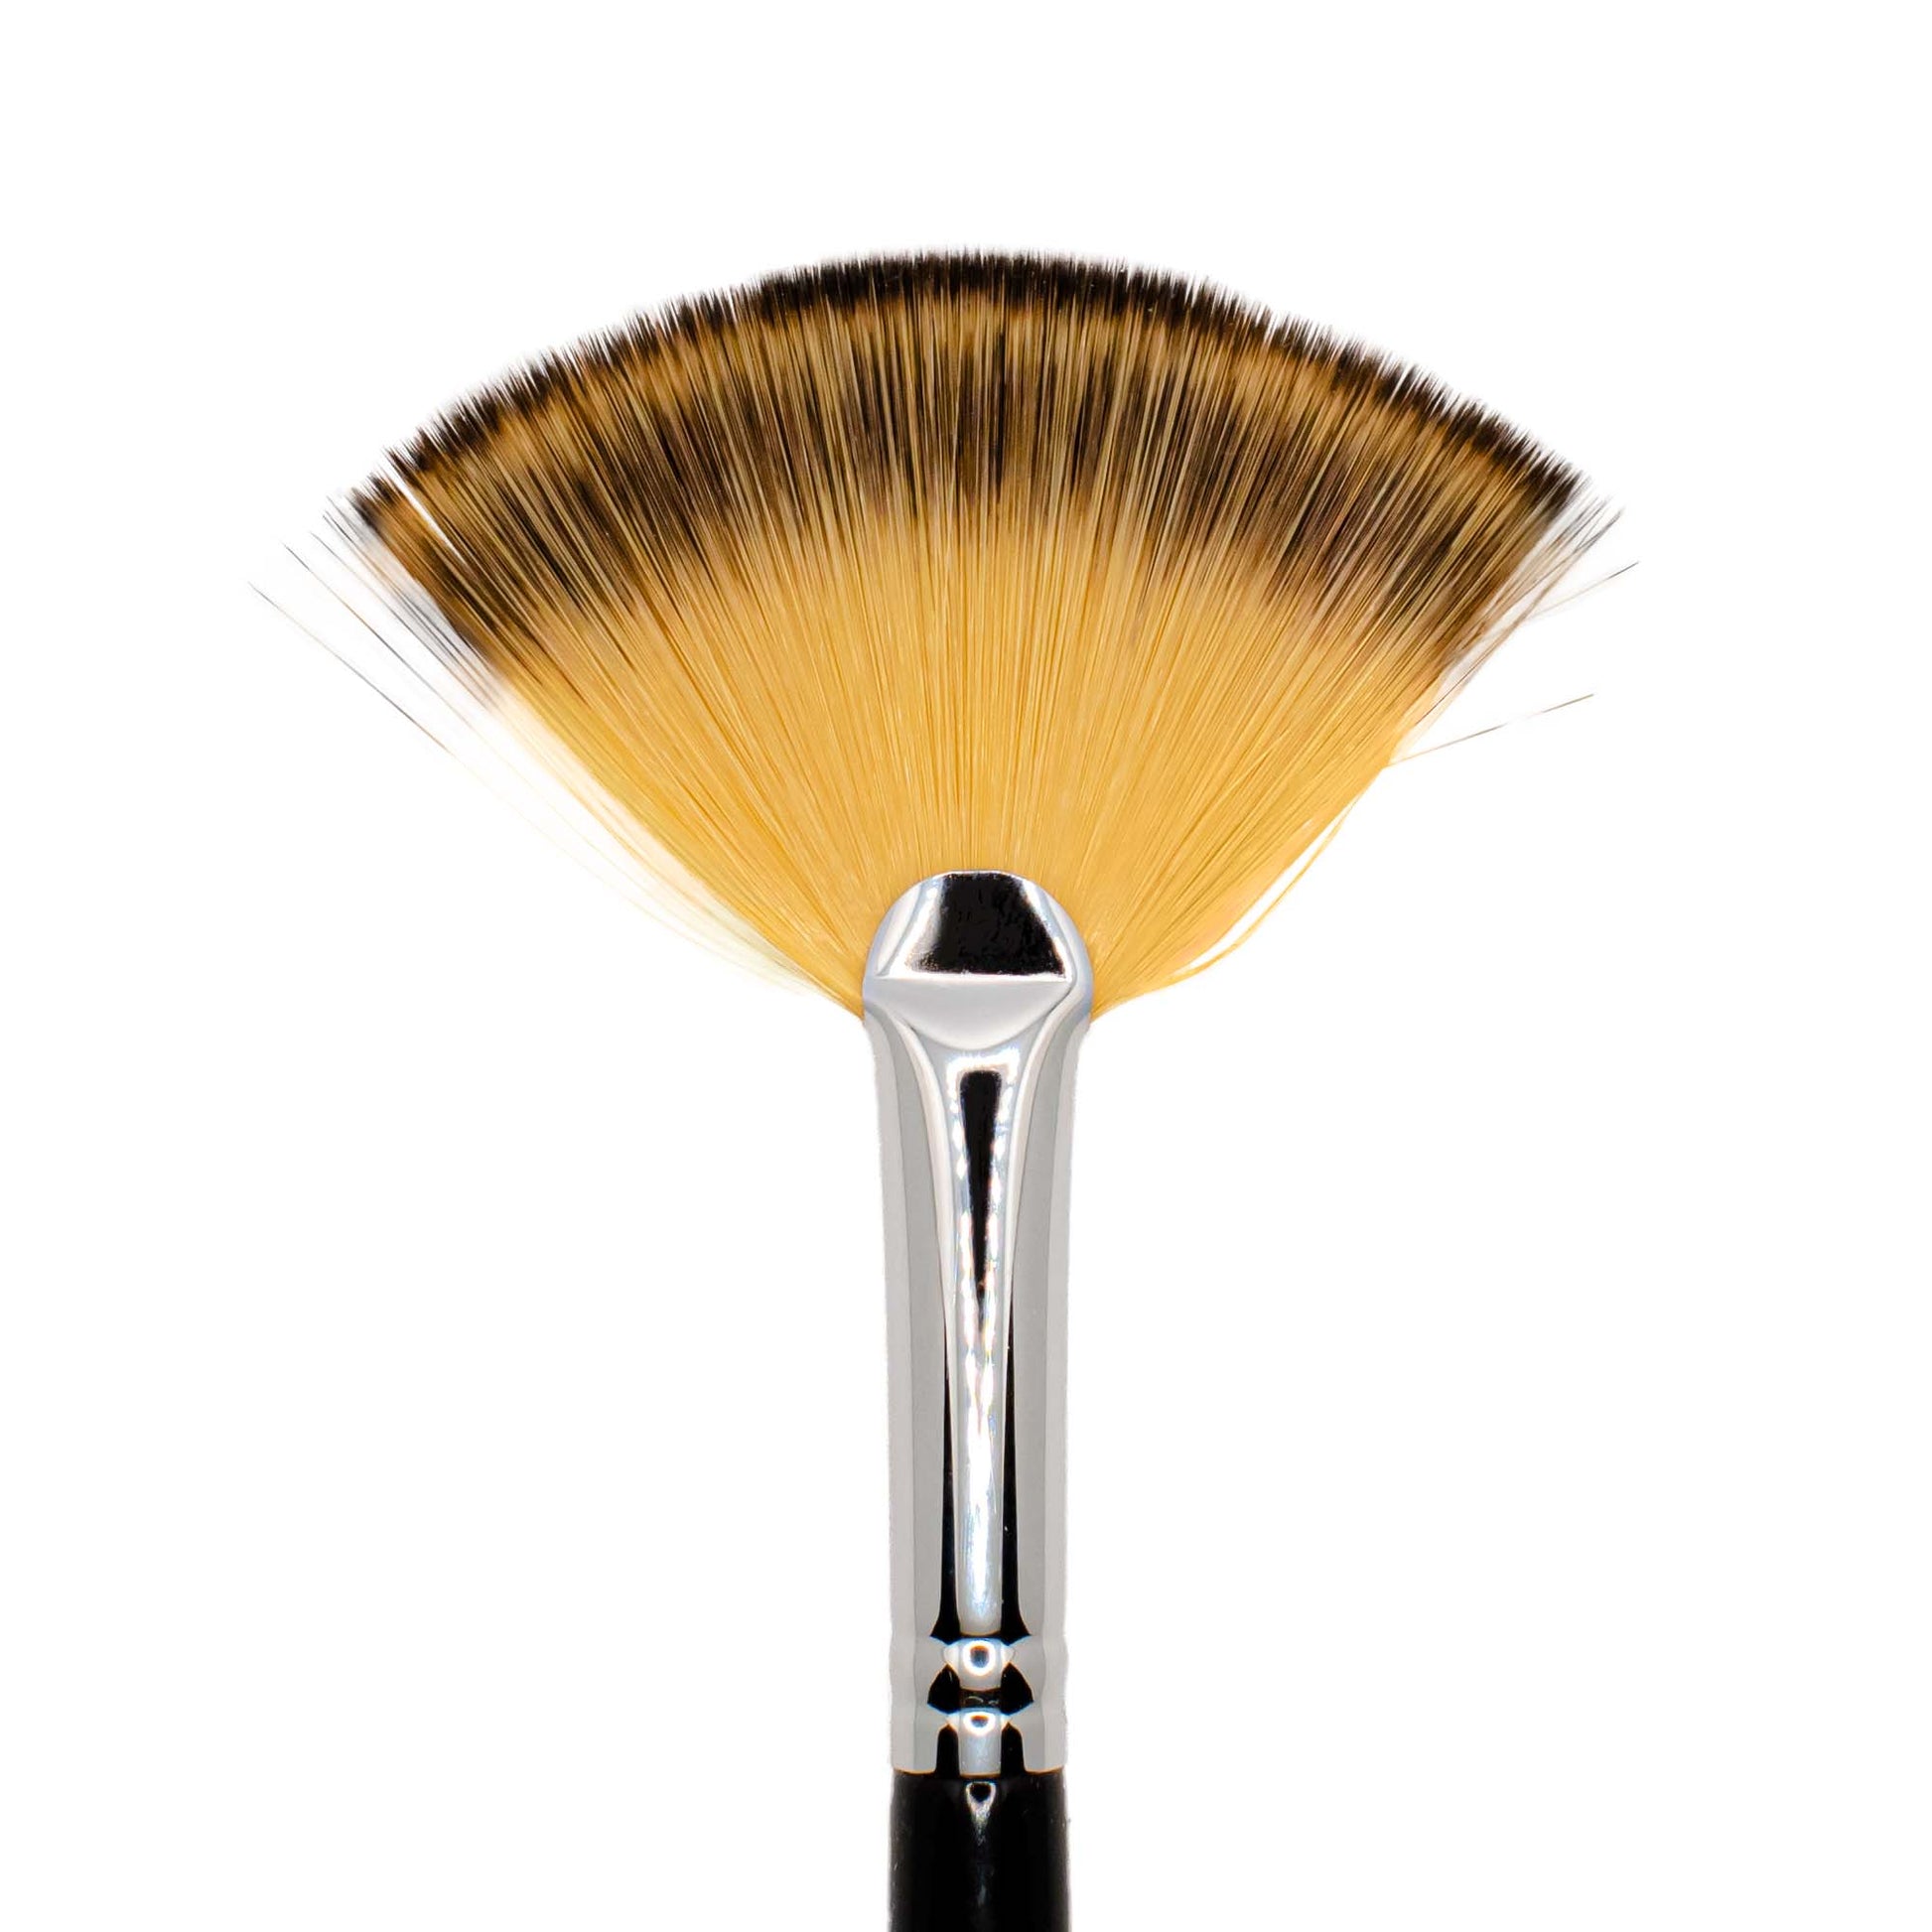 Our Cruisin Organics fan brush is perfect for gently applying dewy highlights, diffusing cheek color, and removing excess powder. Its light, feathery bristles and flat shape ensure precision and accuracy.